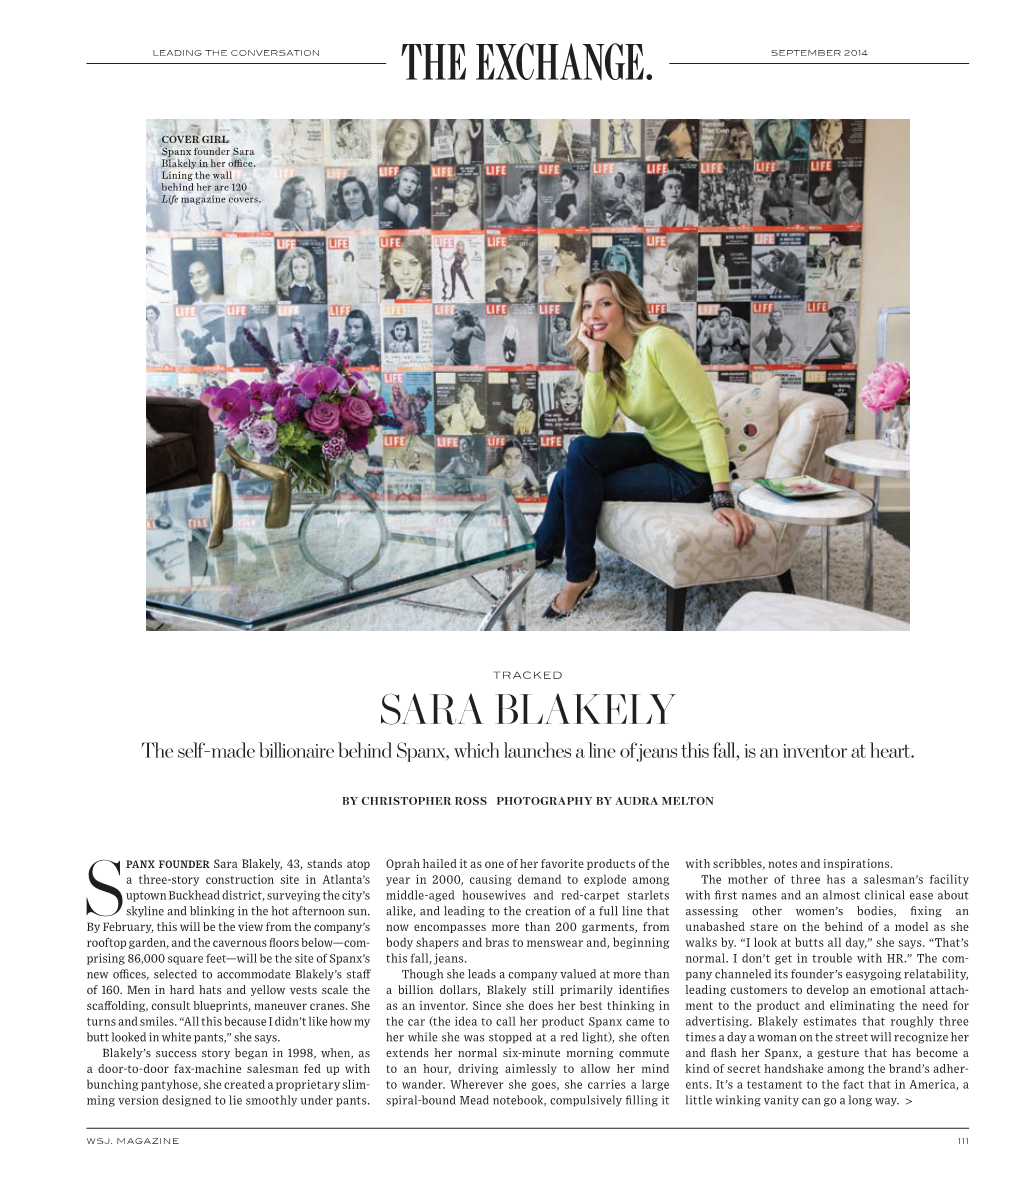 Spanx Founder Sara Blakely in Her Ofce